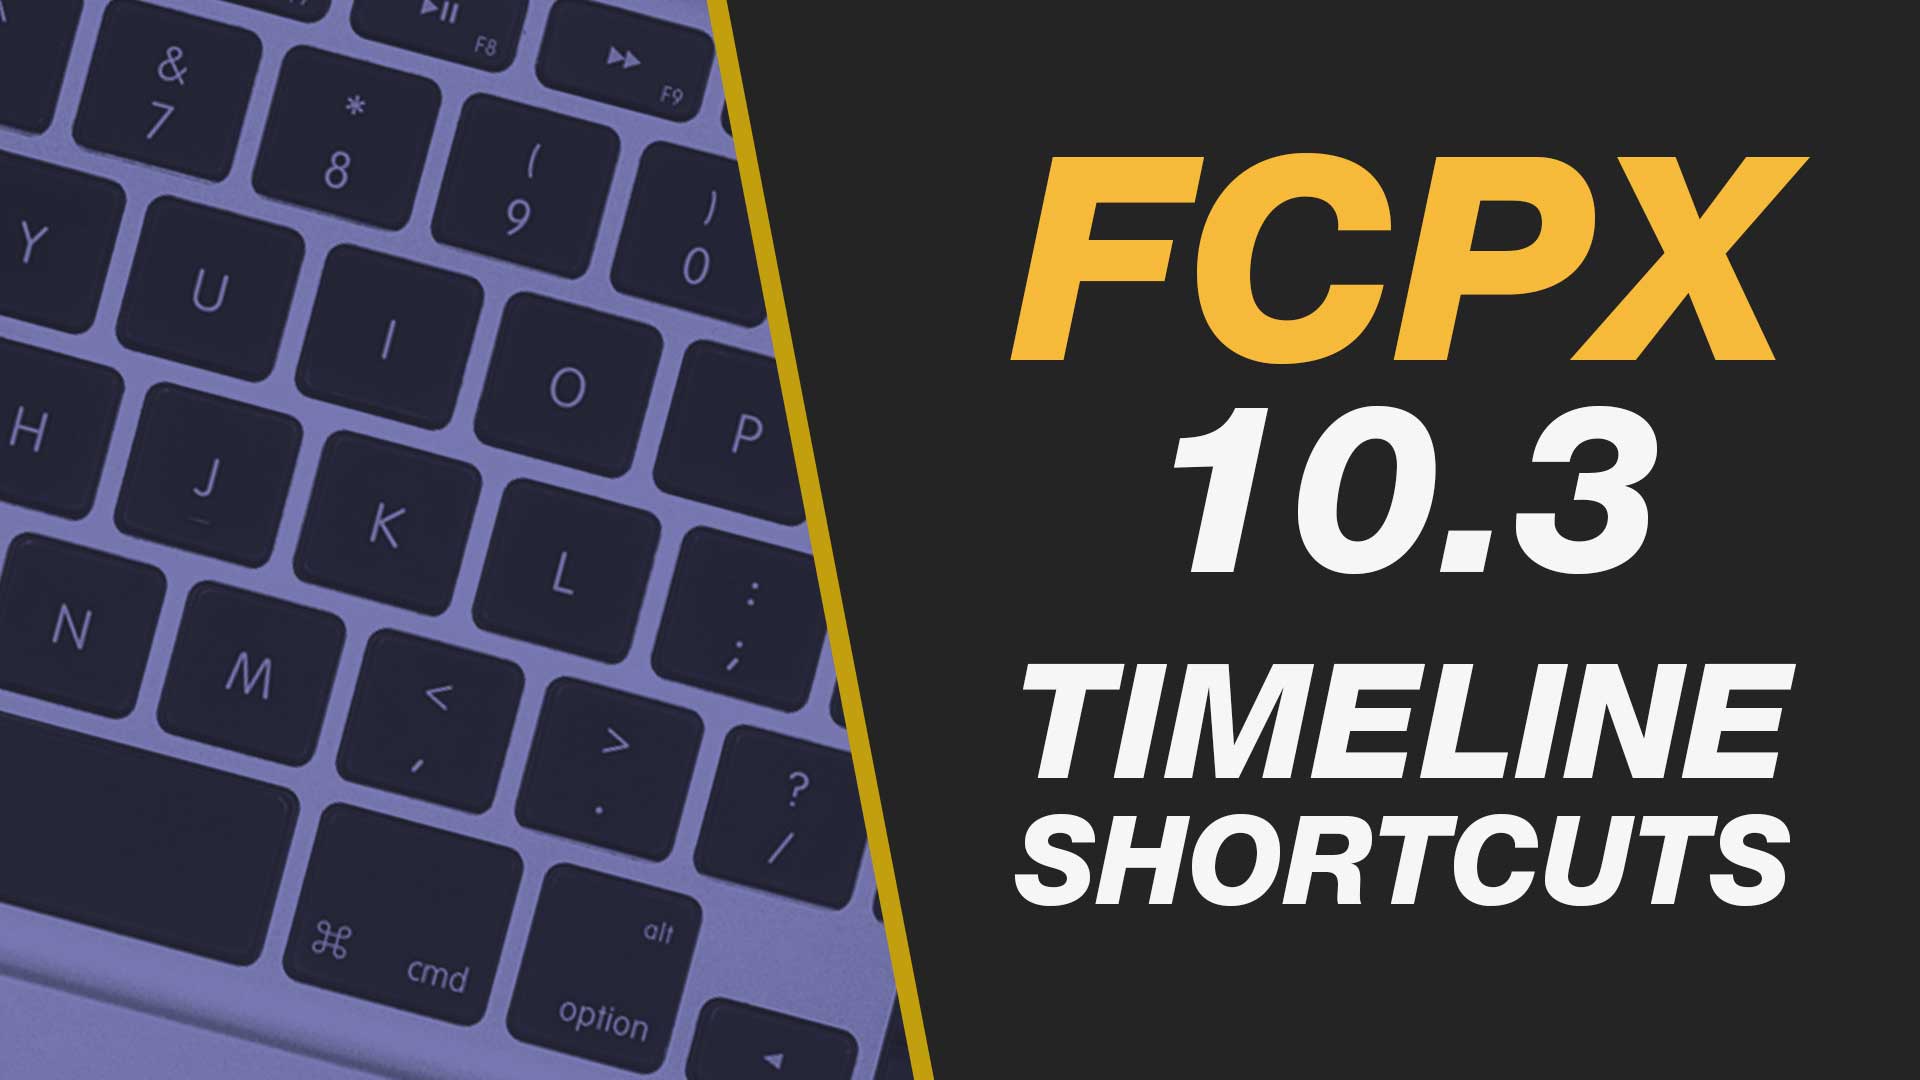 Final Cut Pro X 10.3 Tutorial – Move Around The Timeline with Ease Beginner Class #yqr #yxe #yqr #fcpx